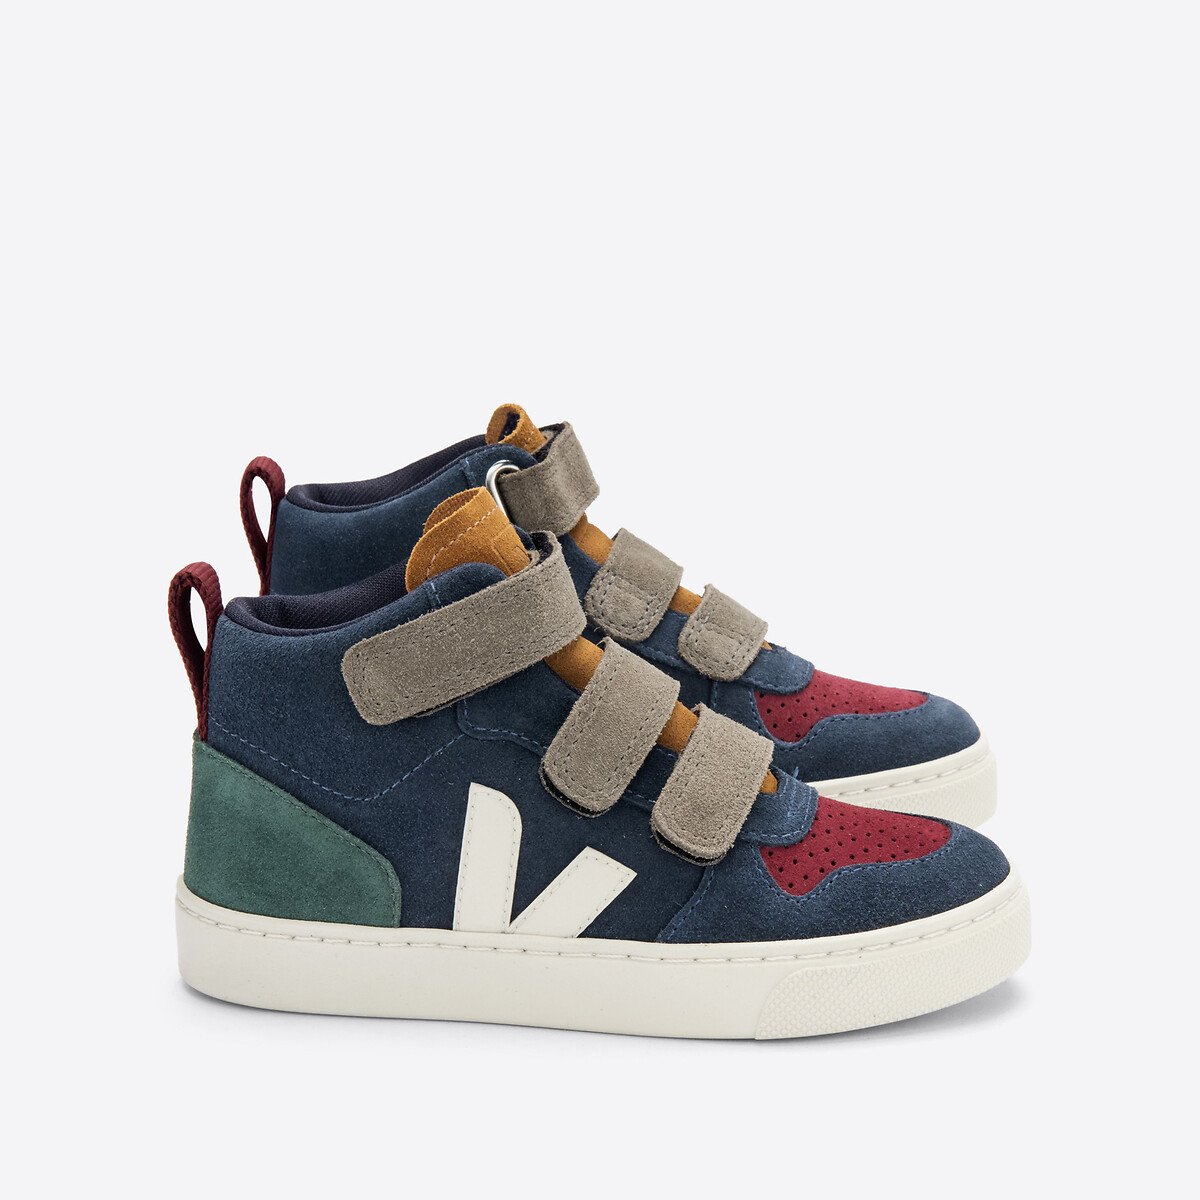 Kids Small V-10 Mid Suede High Top Trainers with Touch ’n’ Close Fastening